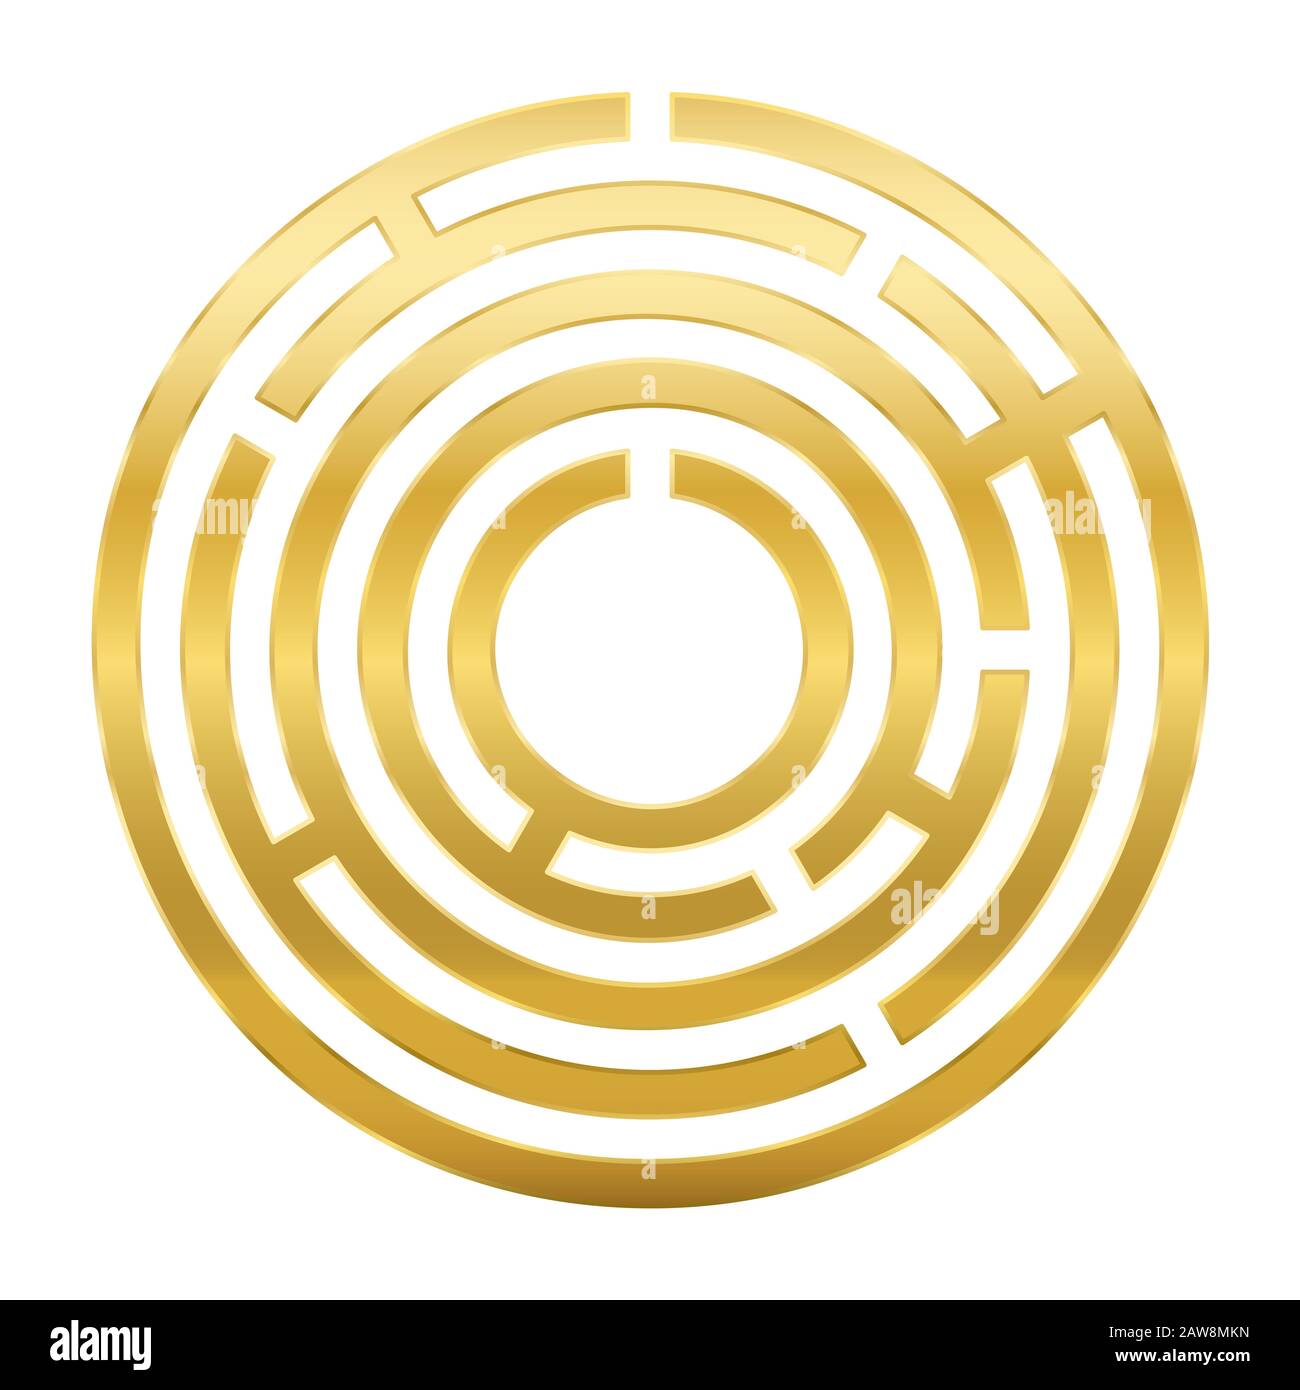 Golden circular maze. Radial labyrinth. Find a route to the centre. Print out and follow the path by a pencil or fingertip. Stock Photo